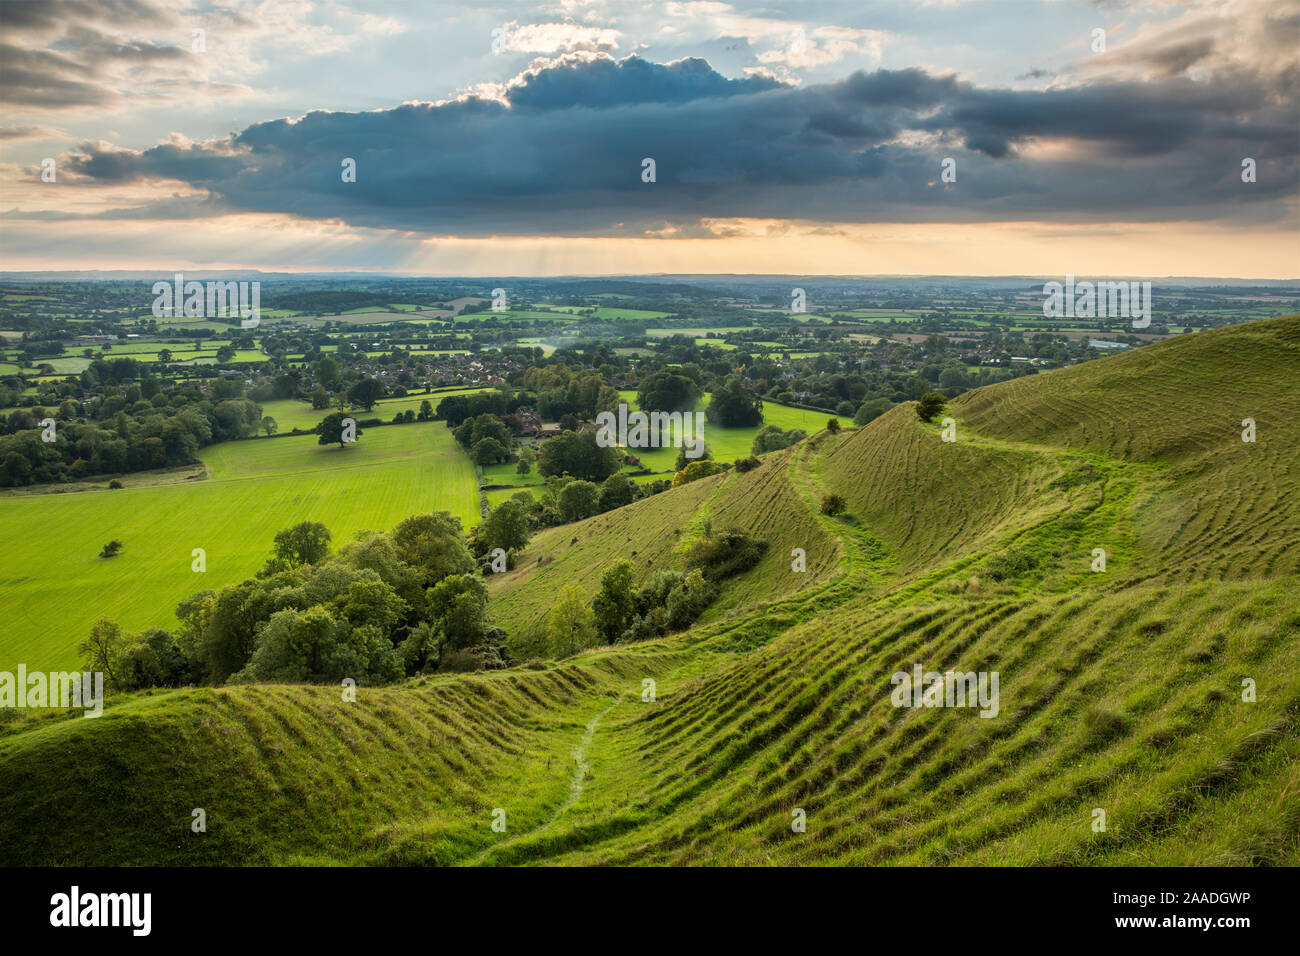 Ramparts of the prehistoric hill fort on Hambledon Hill above the Blackmore Vale, Dorset, England, UK, September 2015. Stock Photo